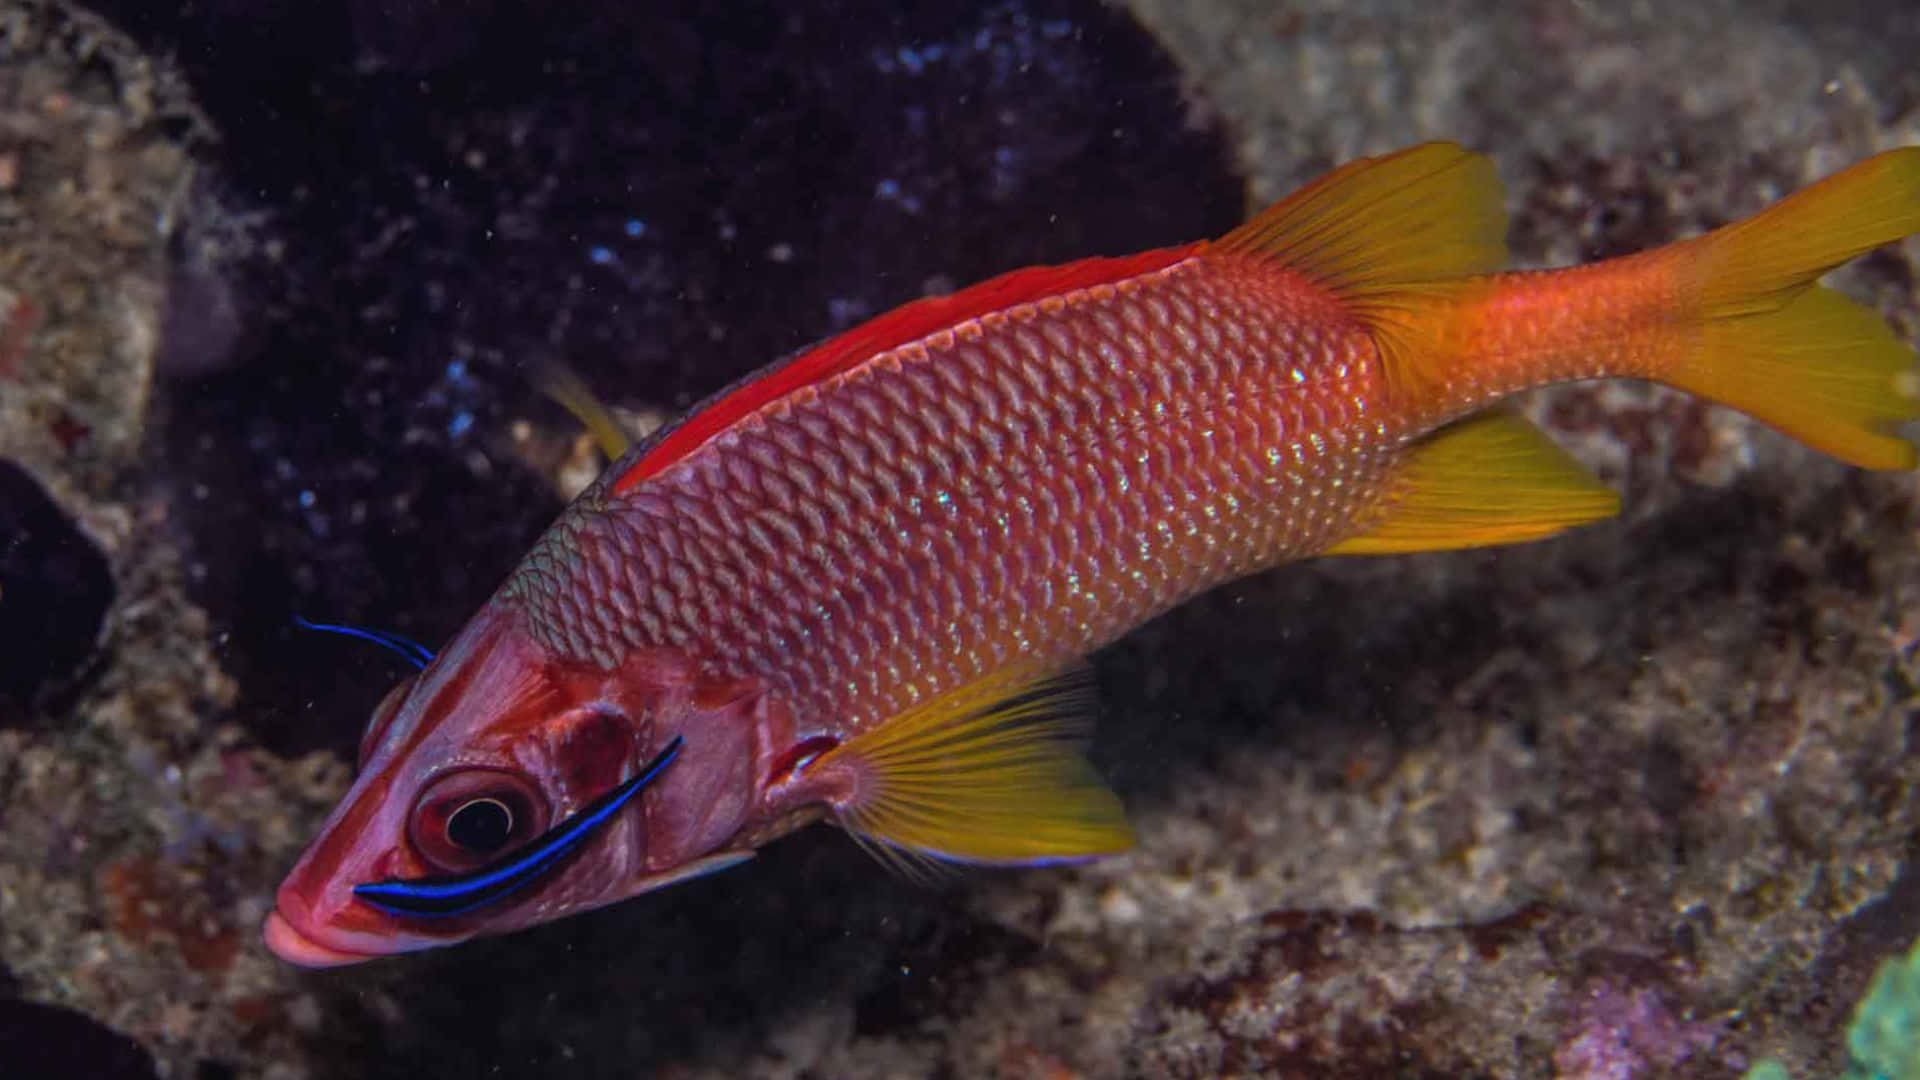 Close-up View Of Vibrant Squirrelfish In Coral Reef Environment Wallpaper